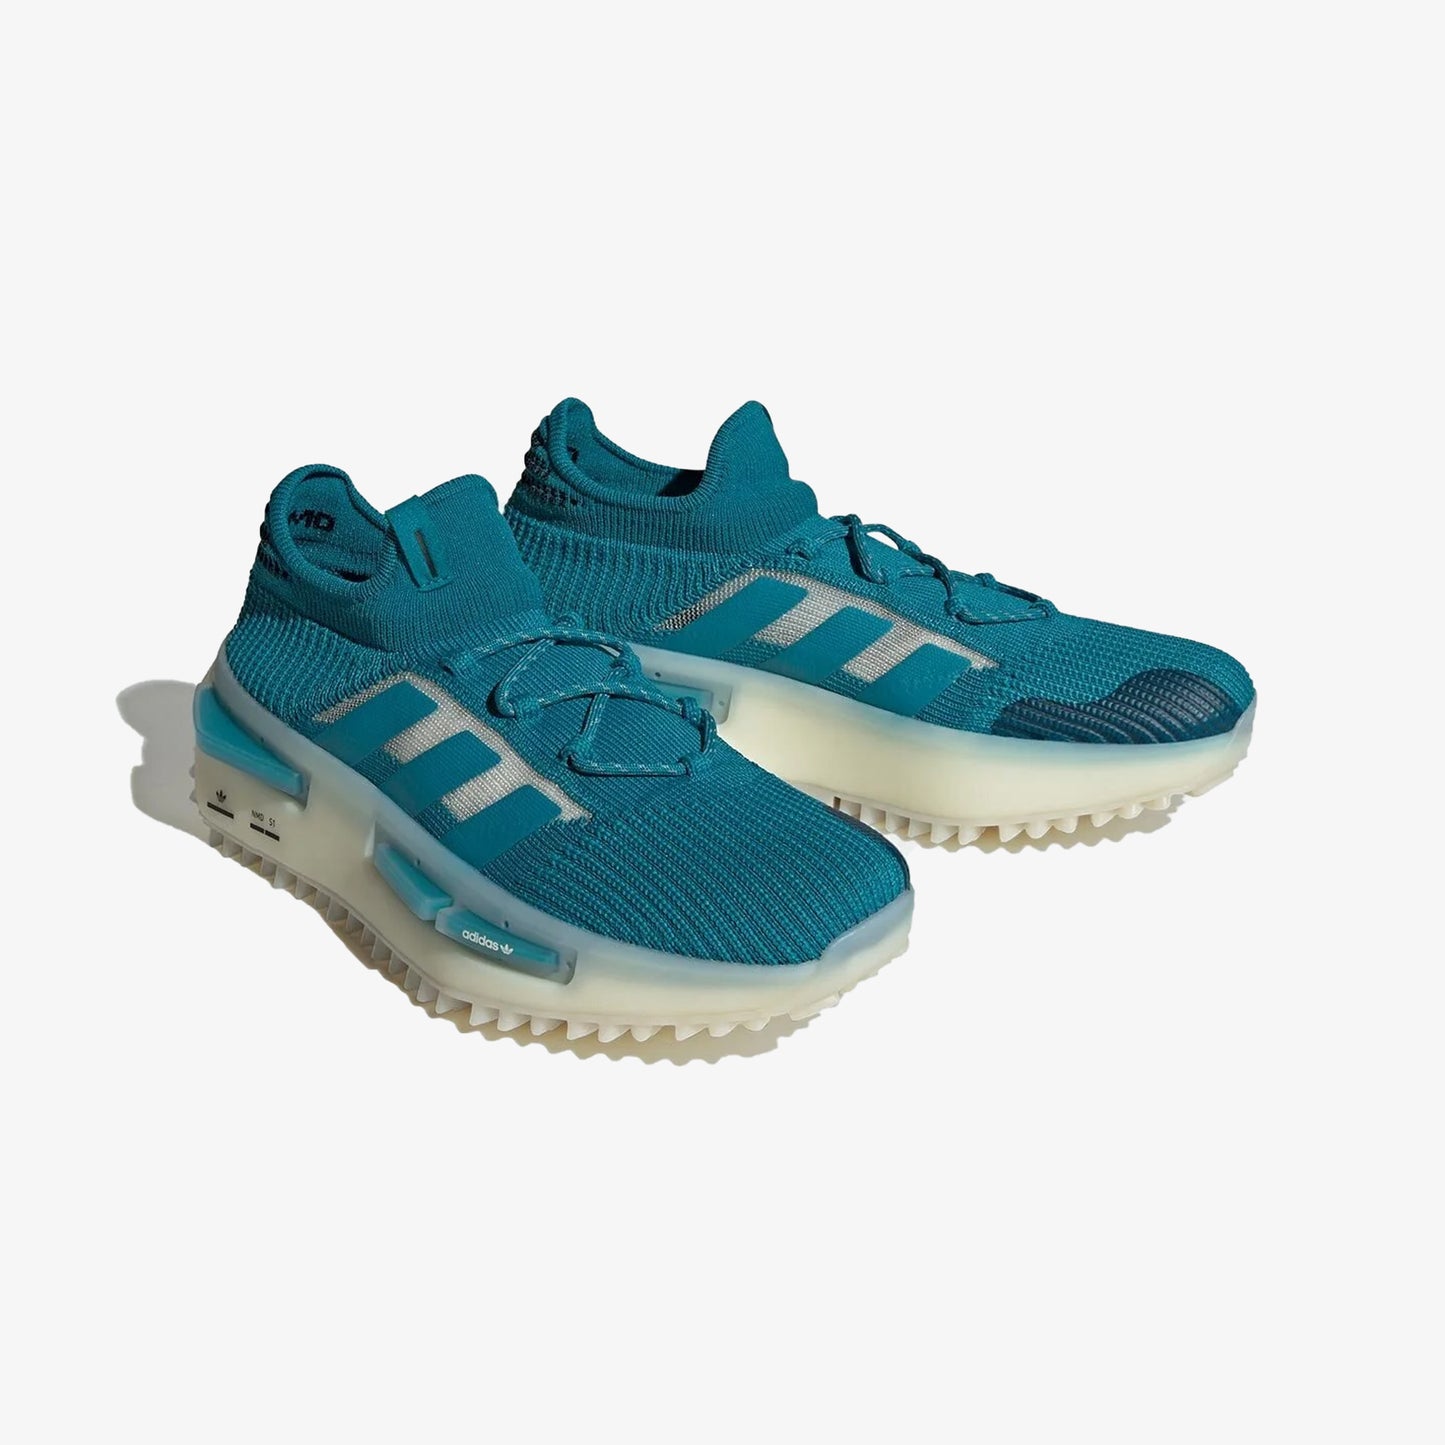 NMD_S1 SCHUH 'ACTIVE TEAL/CORE BLACK'